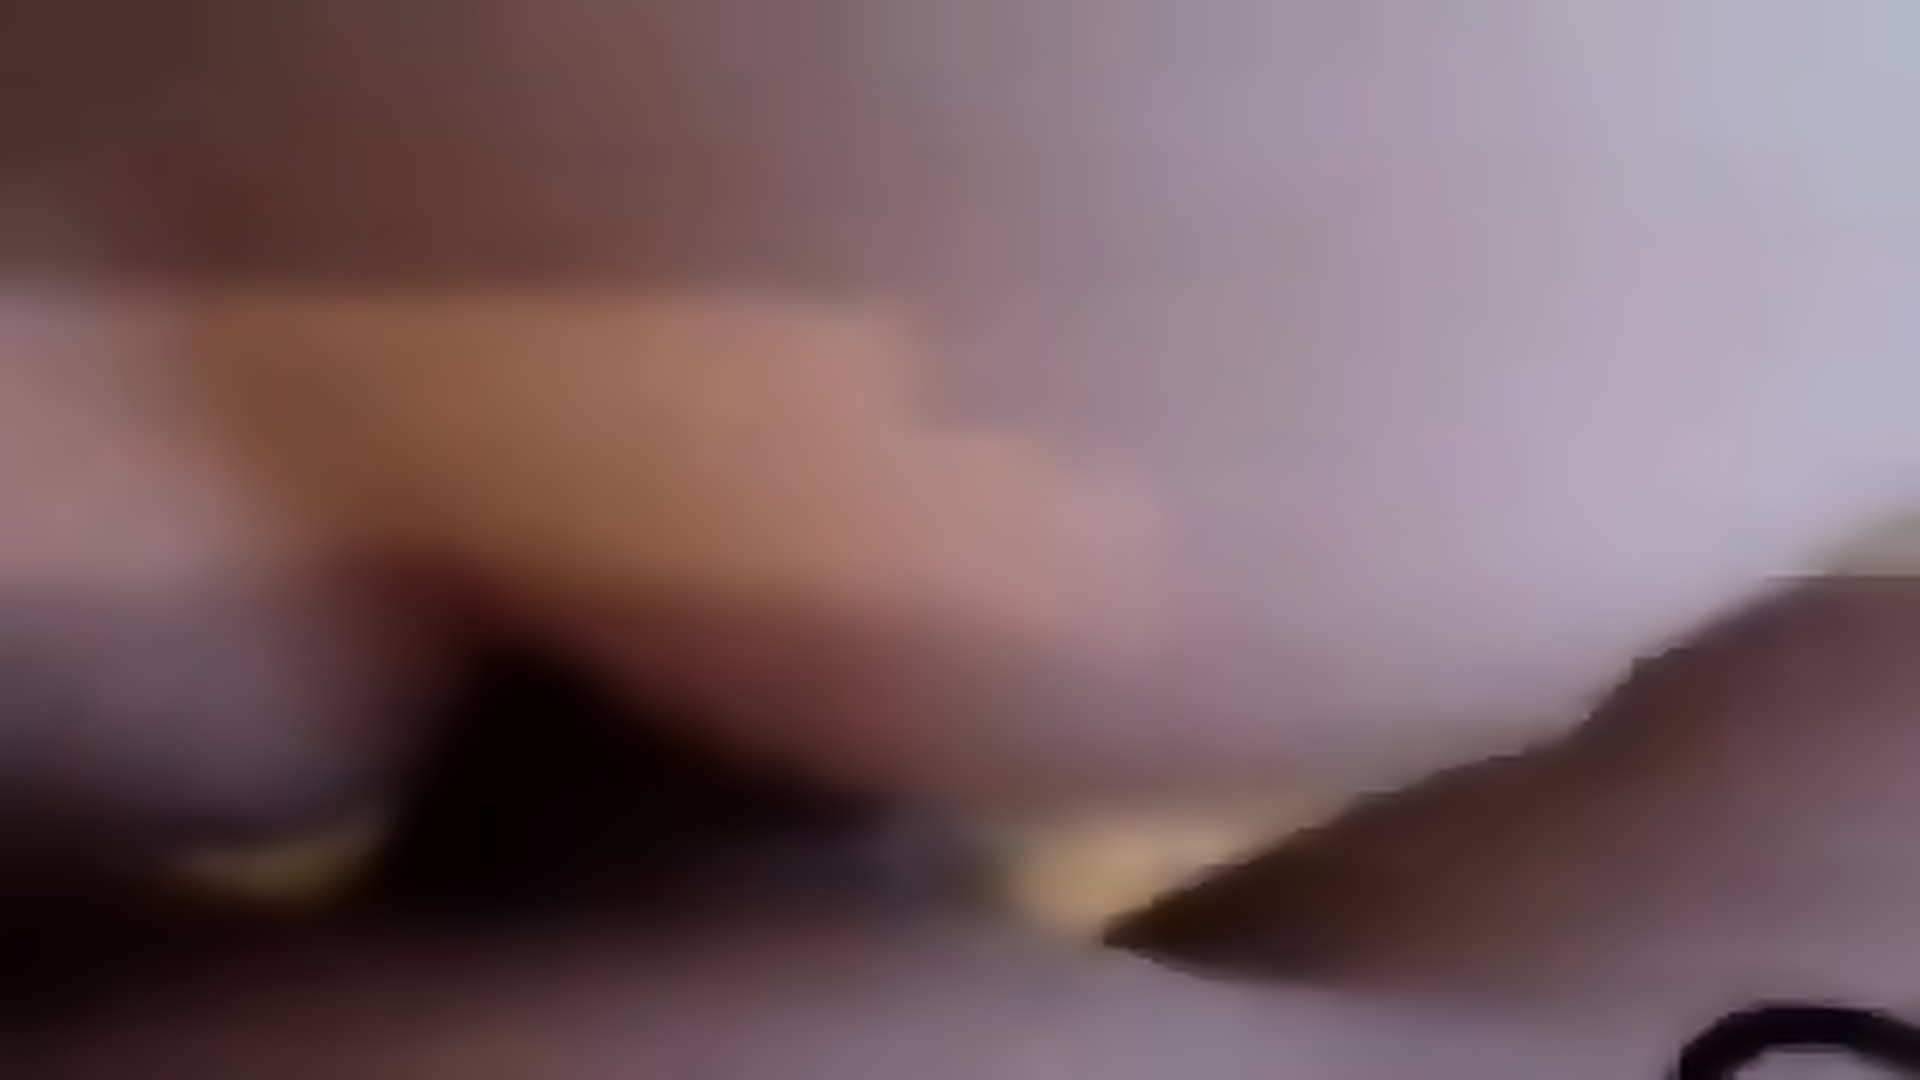 Homemade Rough Anal Sex With Russian Girlfriend